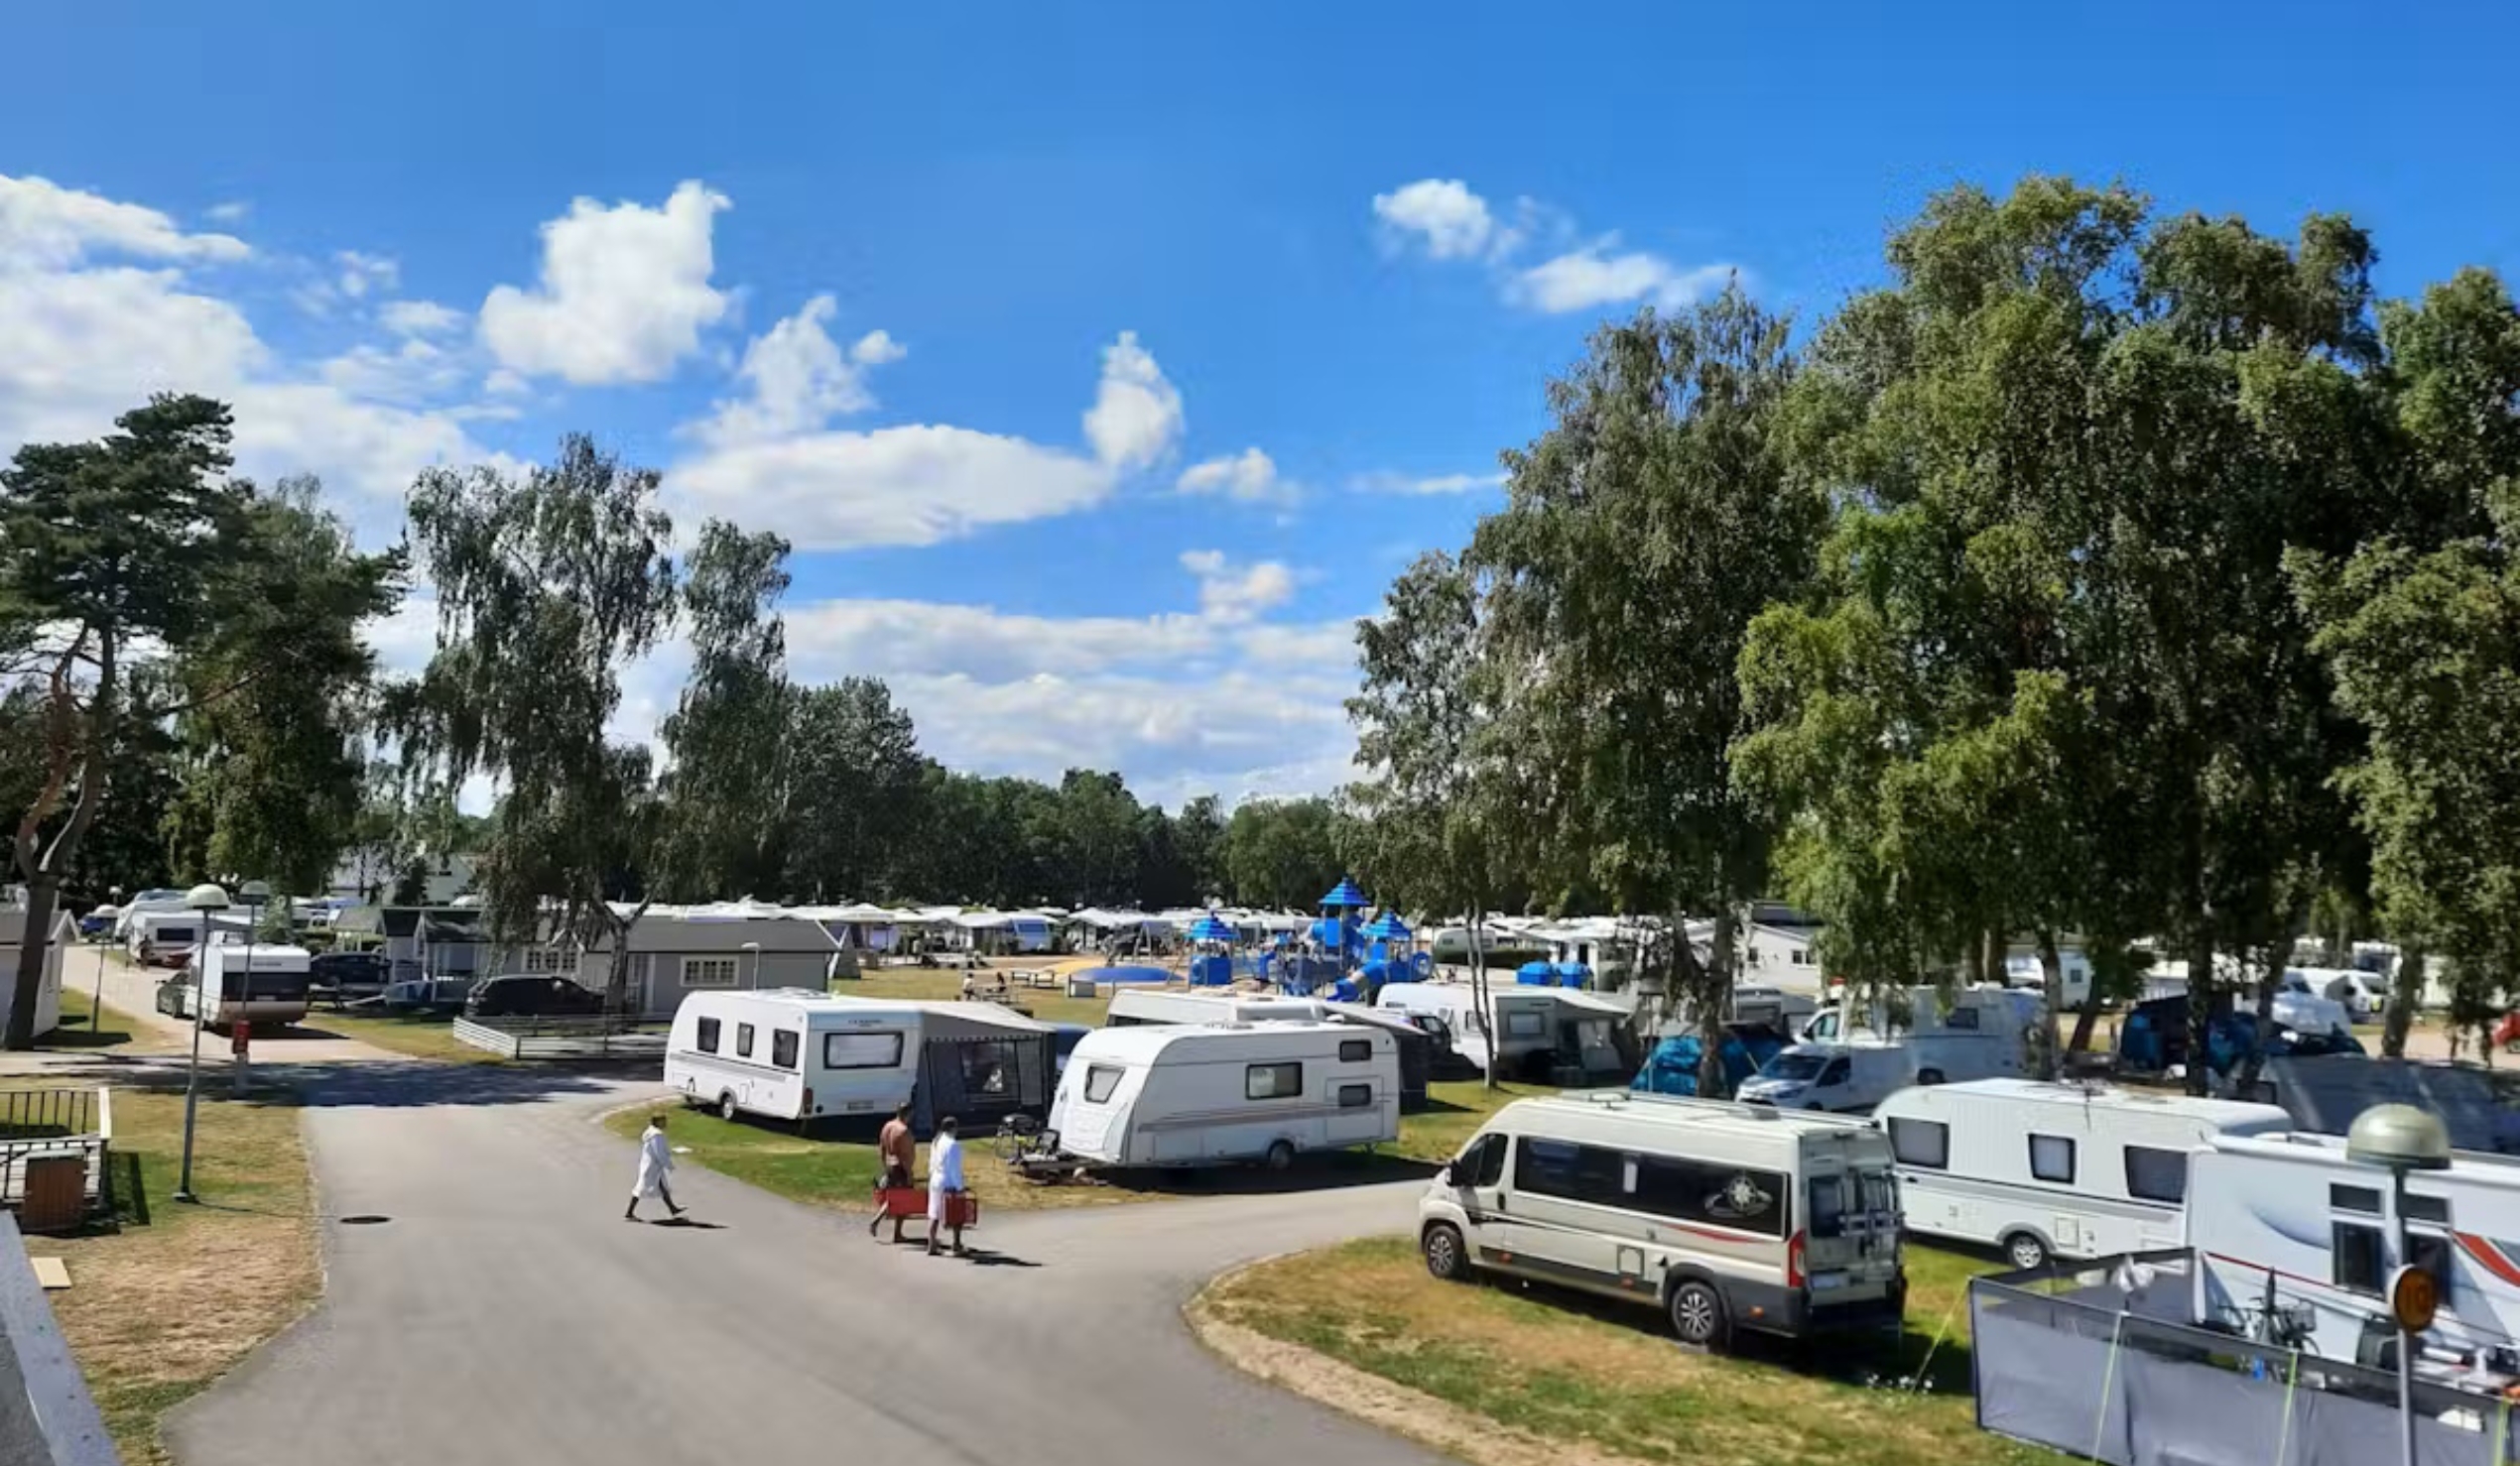 Falsterbo Camping & Resort is a popular campsite.